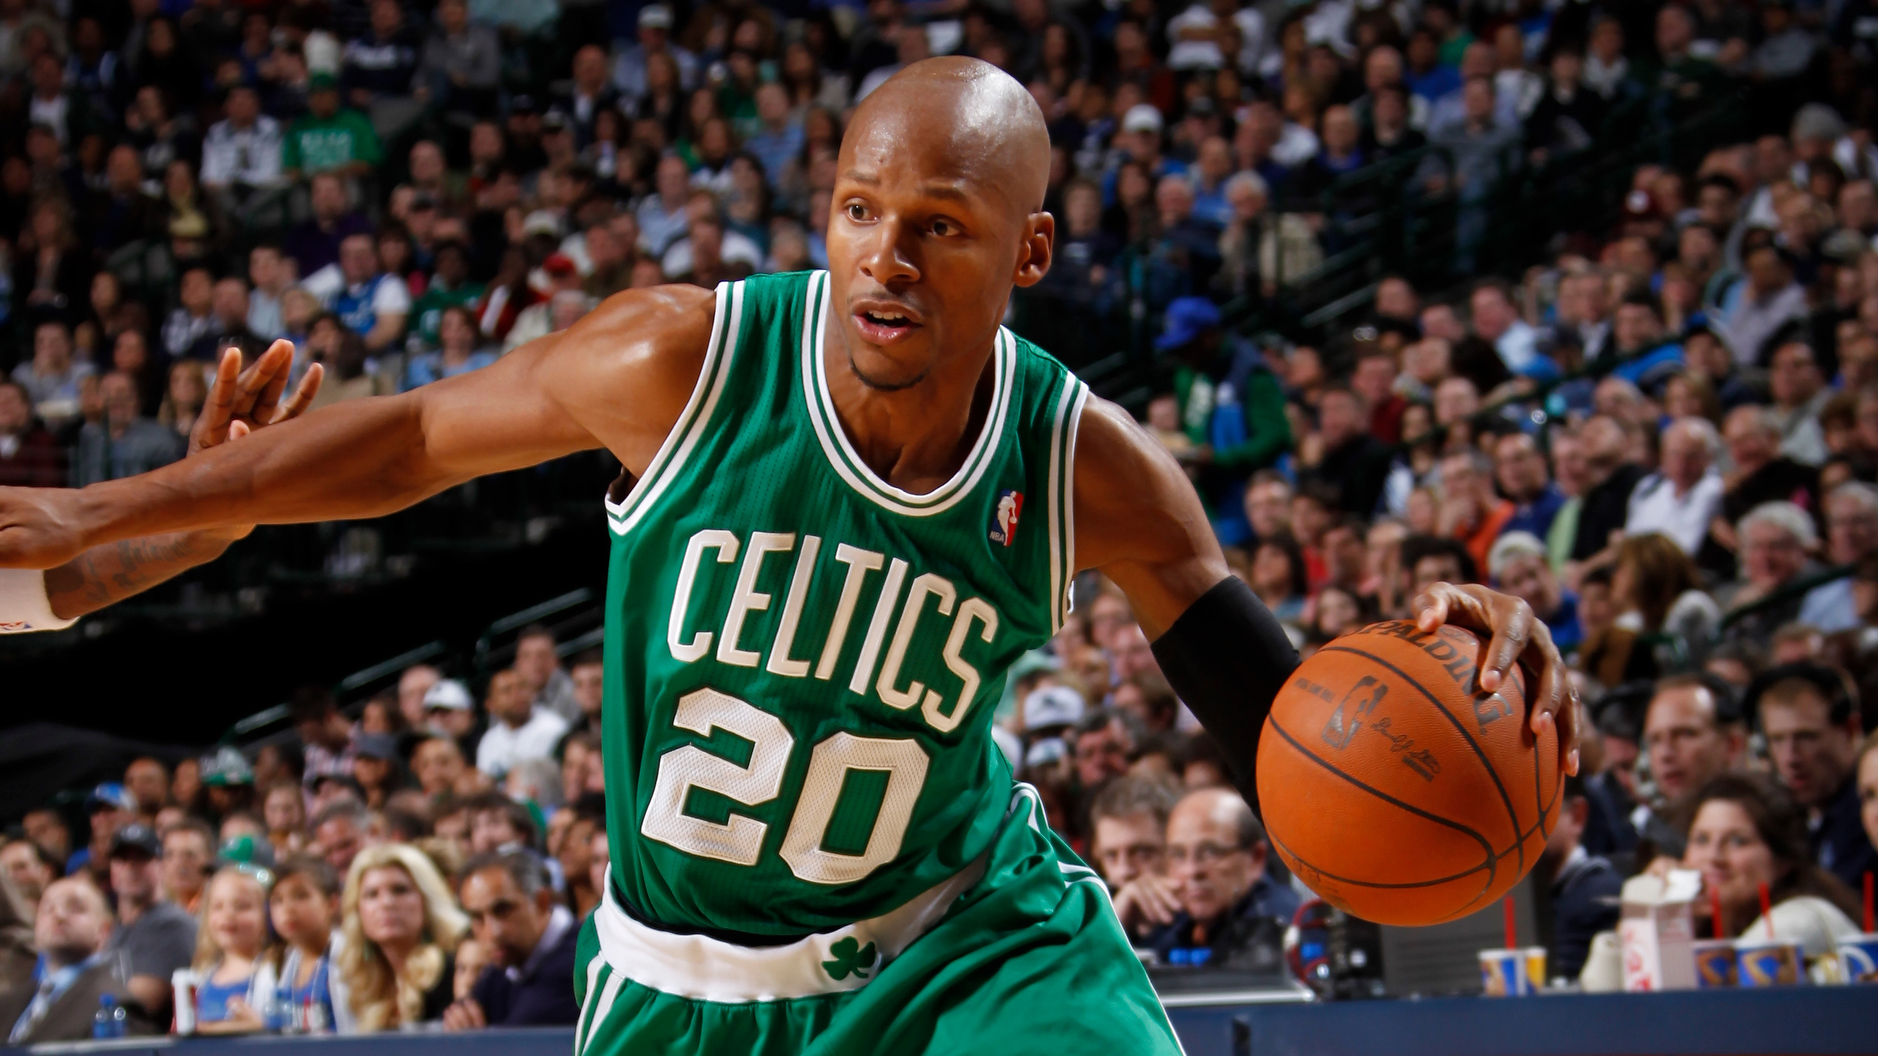 47-year-old US basketball legend, Ray Allen earns Bachelor's